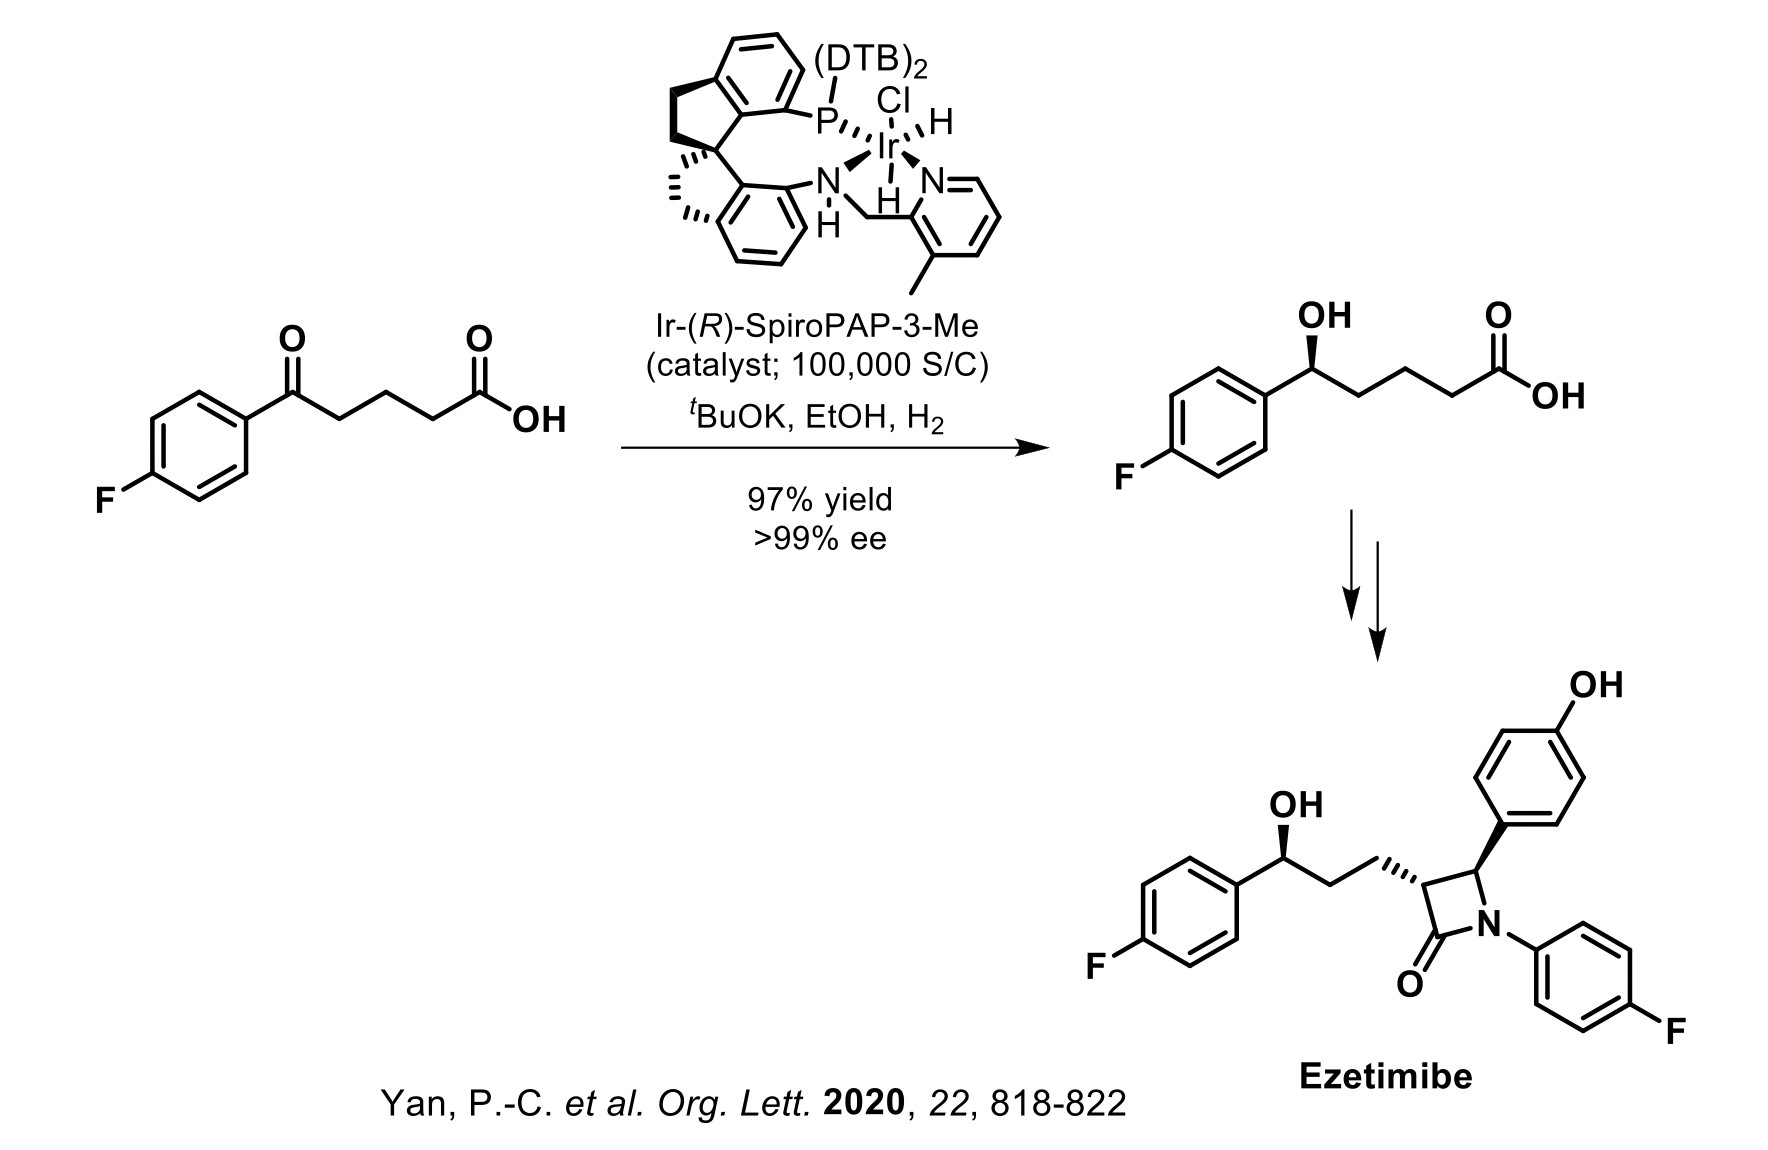 Privileged Chiral Spiro Ligands and Applications to Commercially Marketed APIs Image